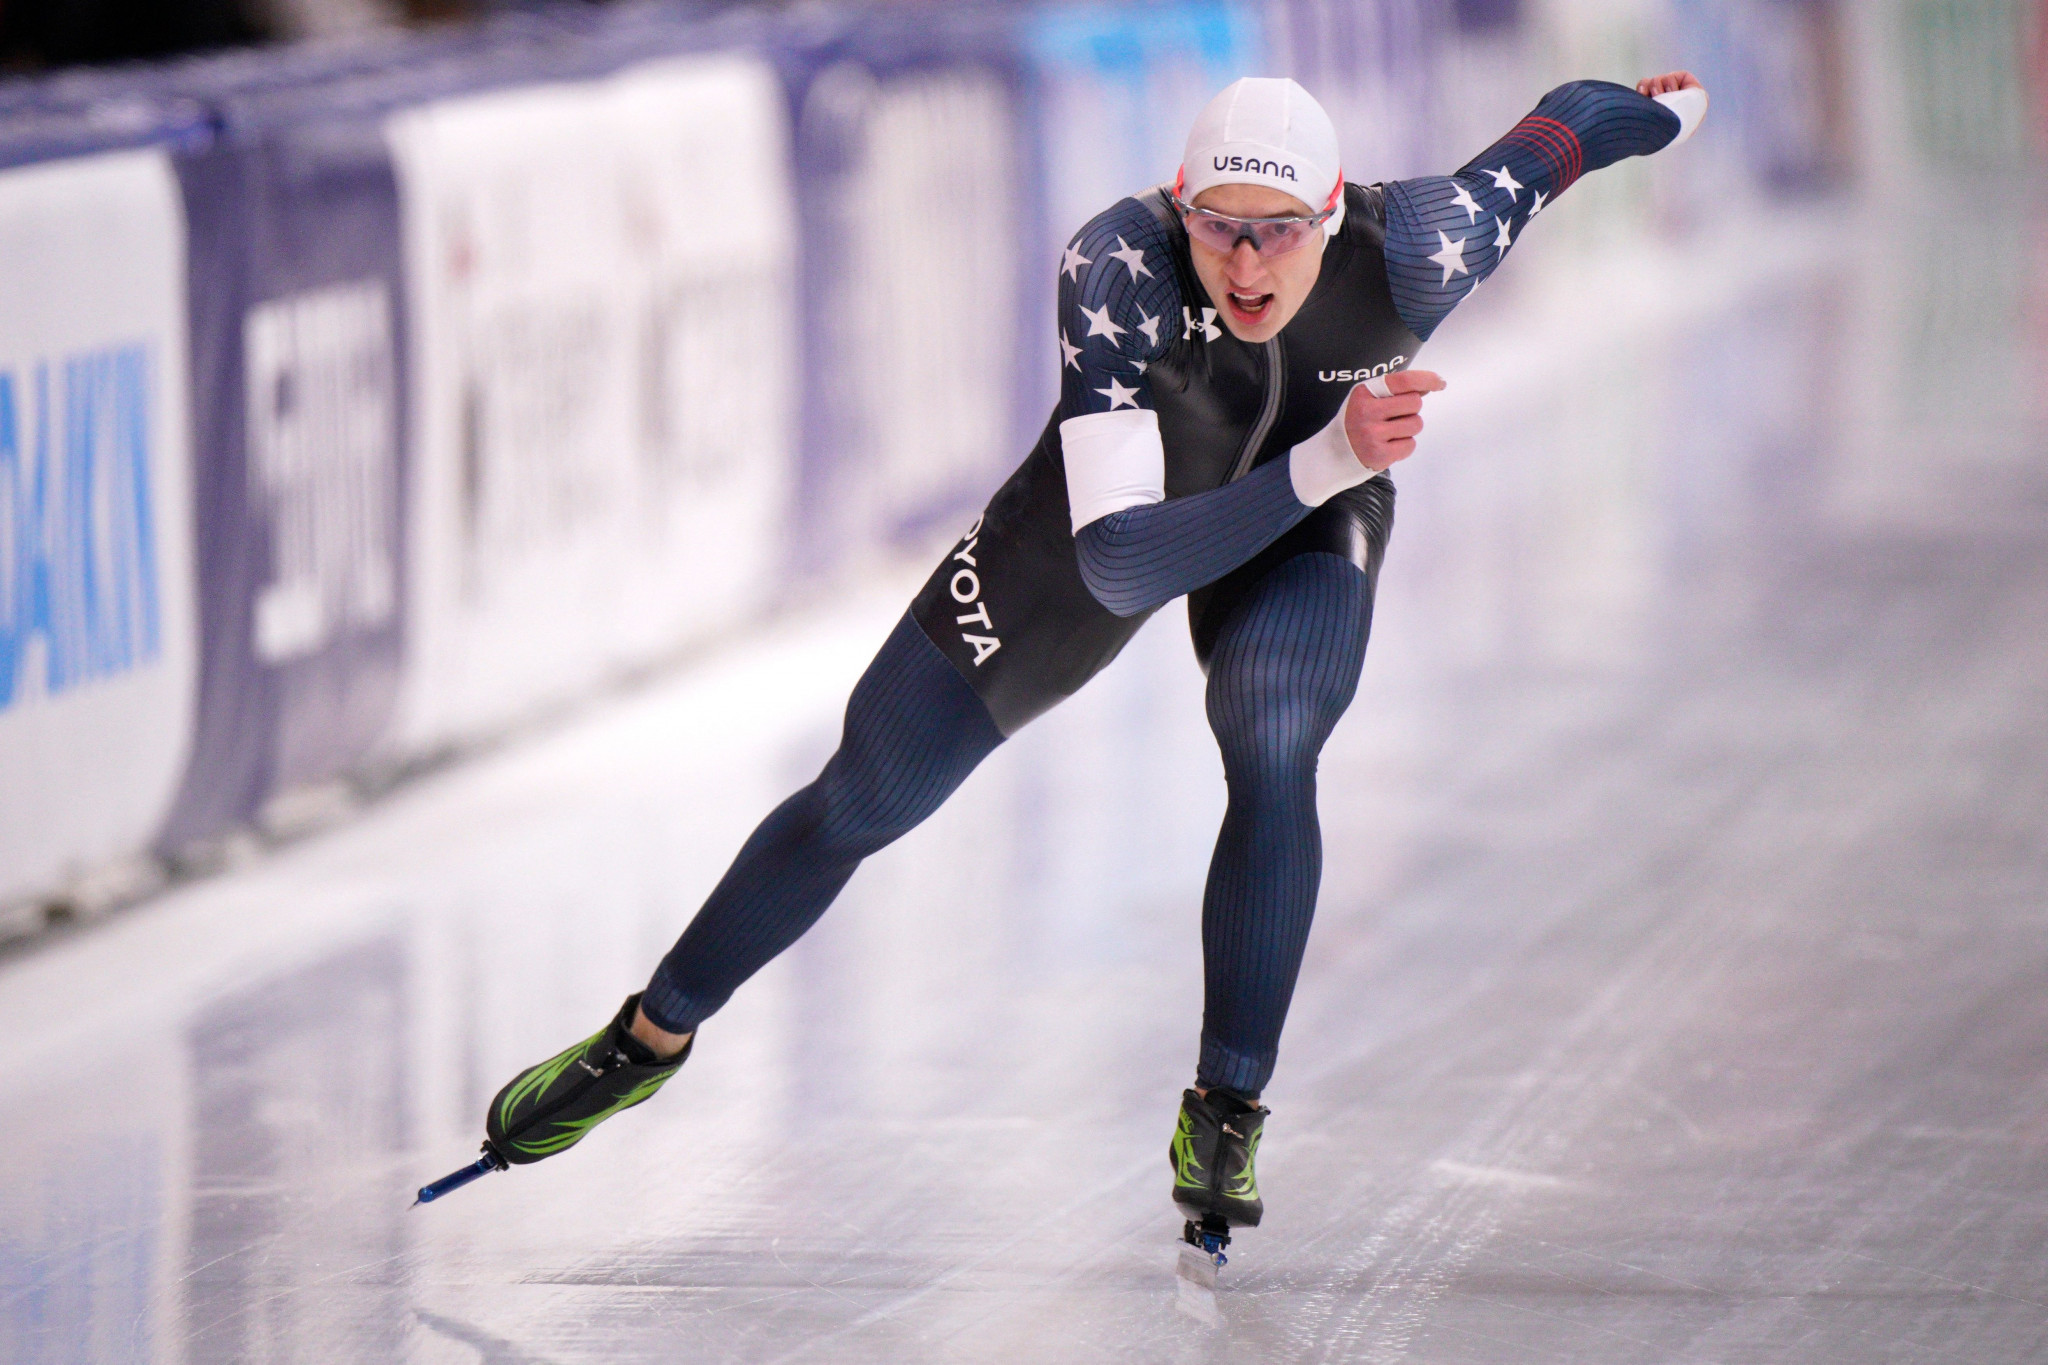 Stolz secures third gold at World Single Distance Speed Skating Championships